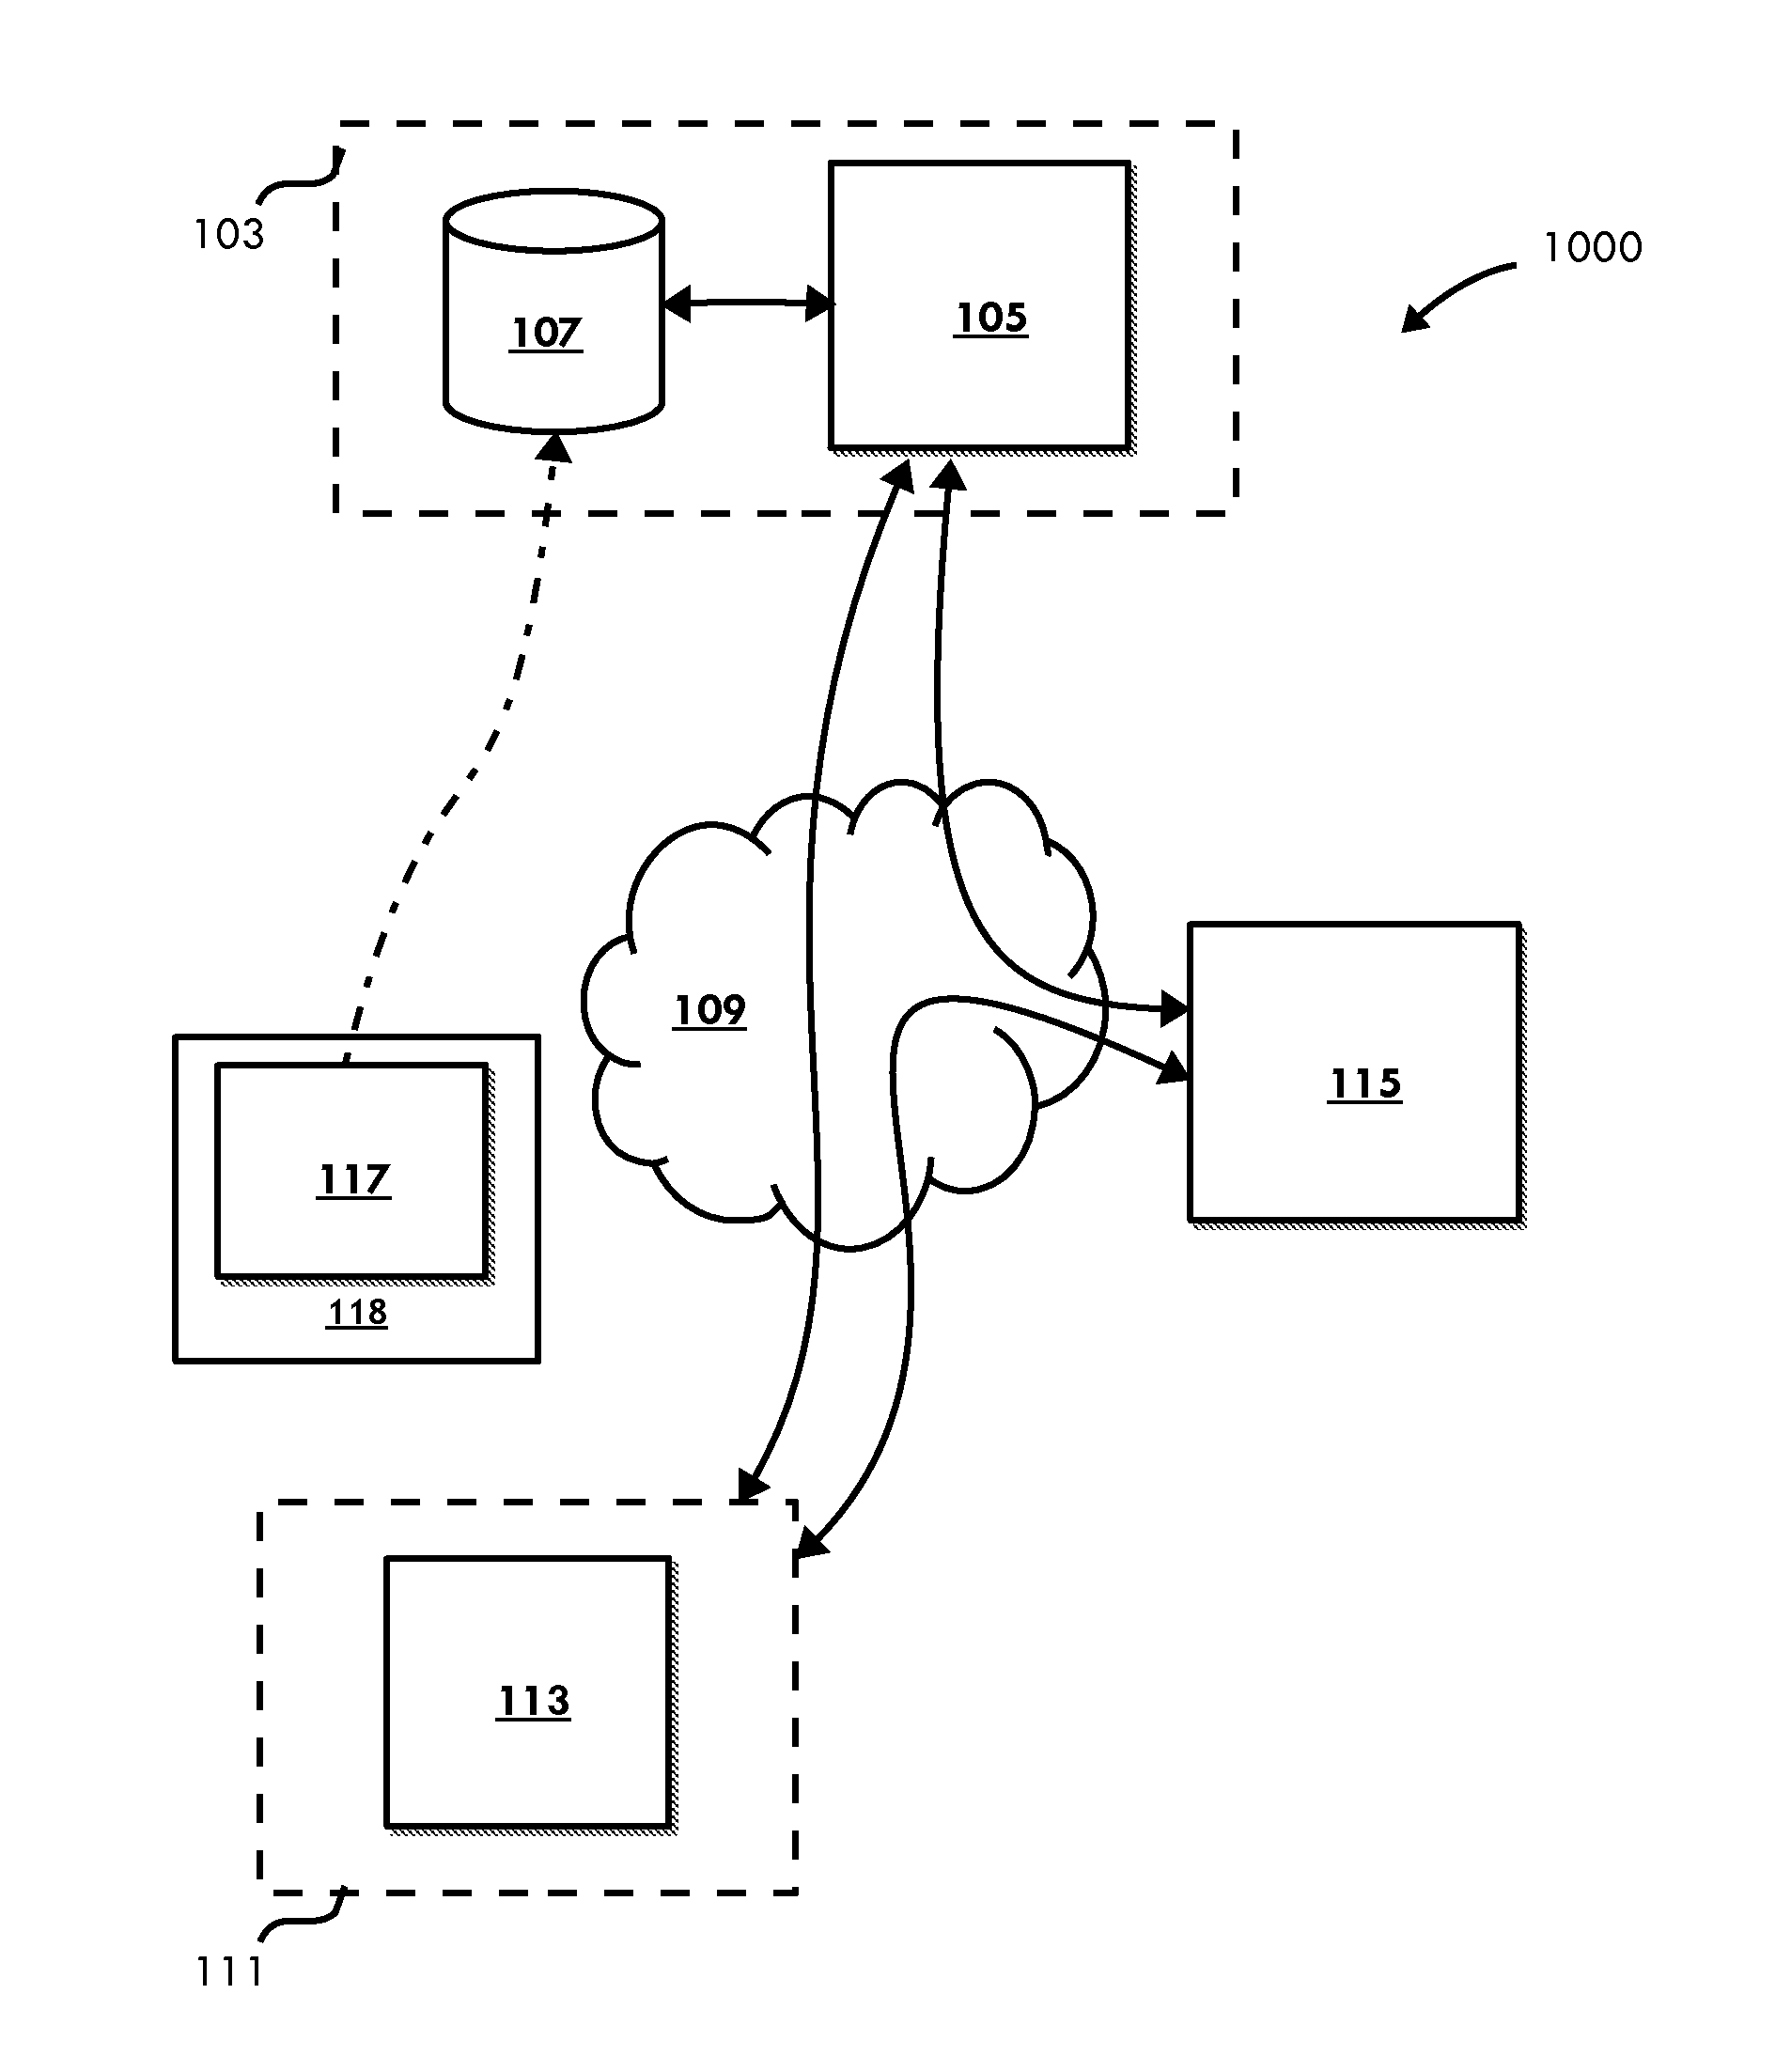 System and Method for Controlled Decentralized Authorization and Access for Electronic Records